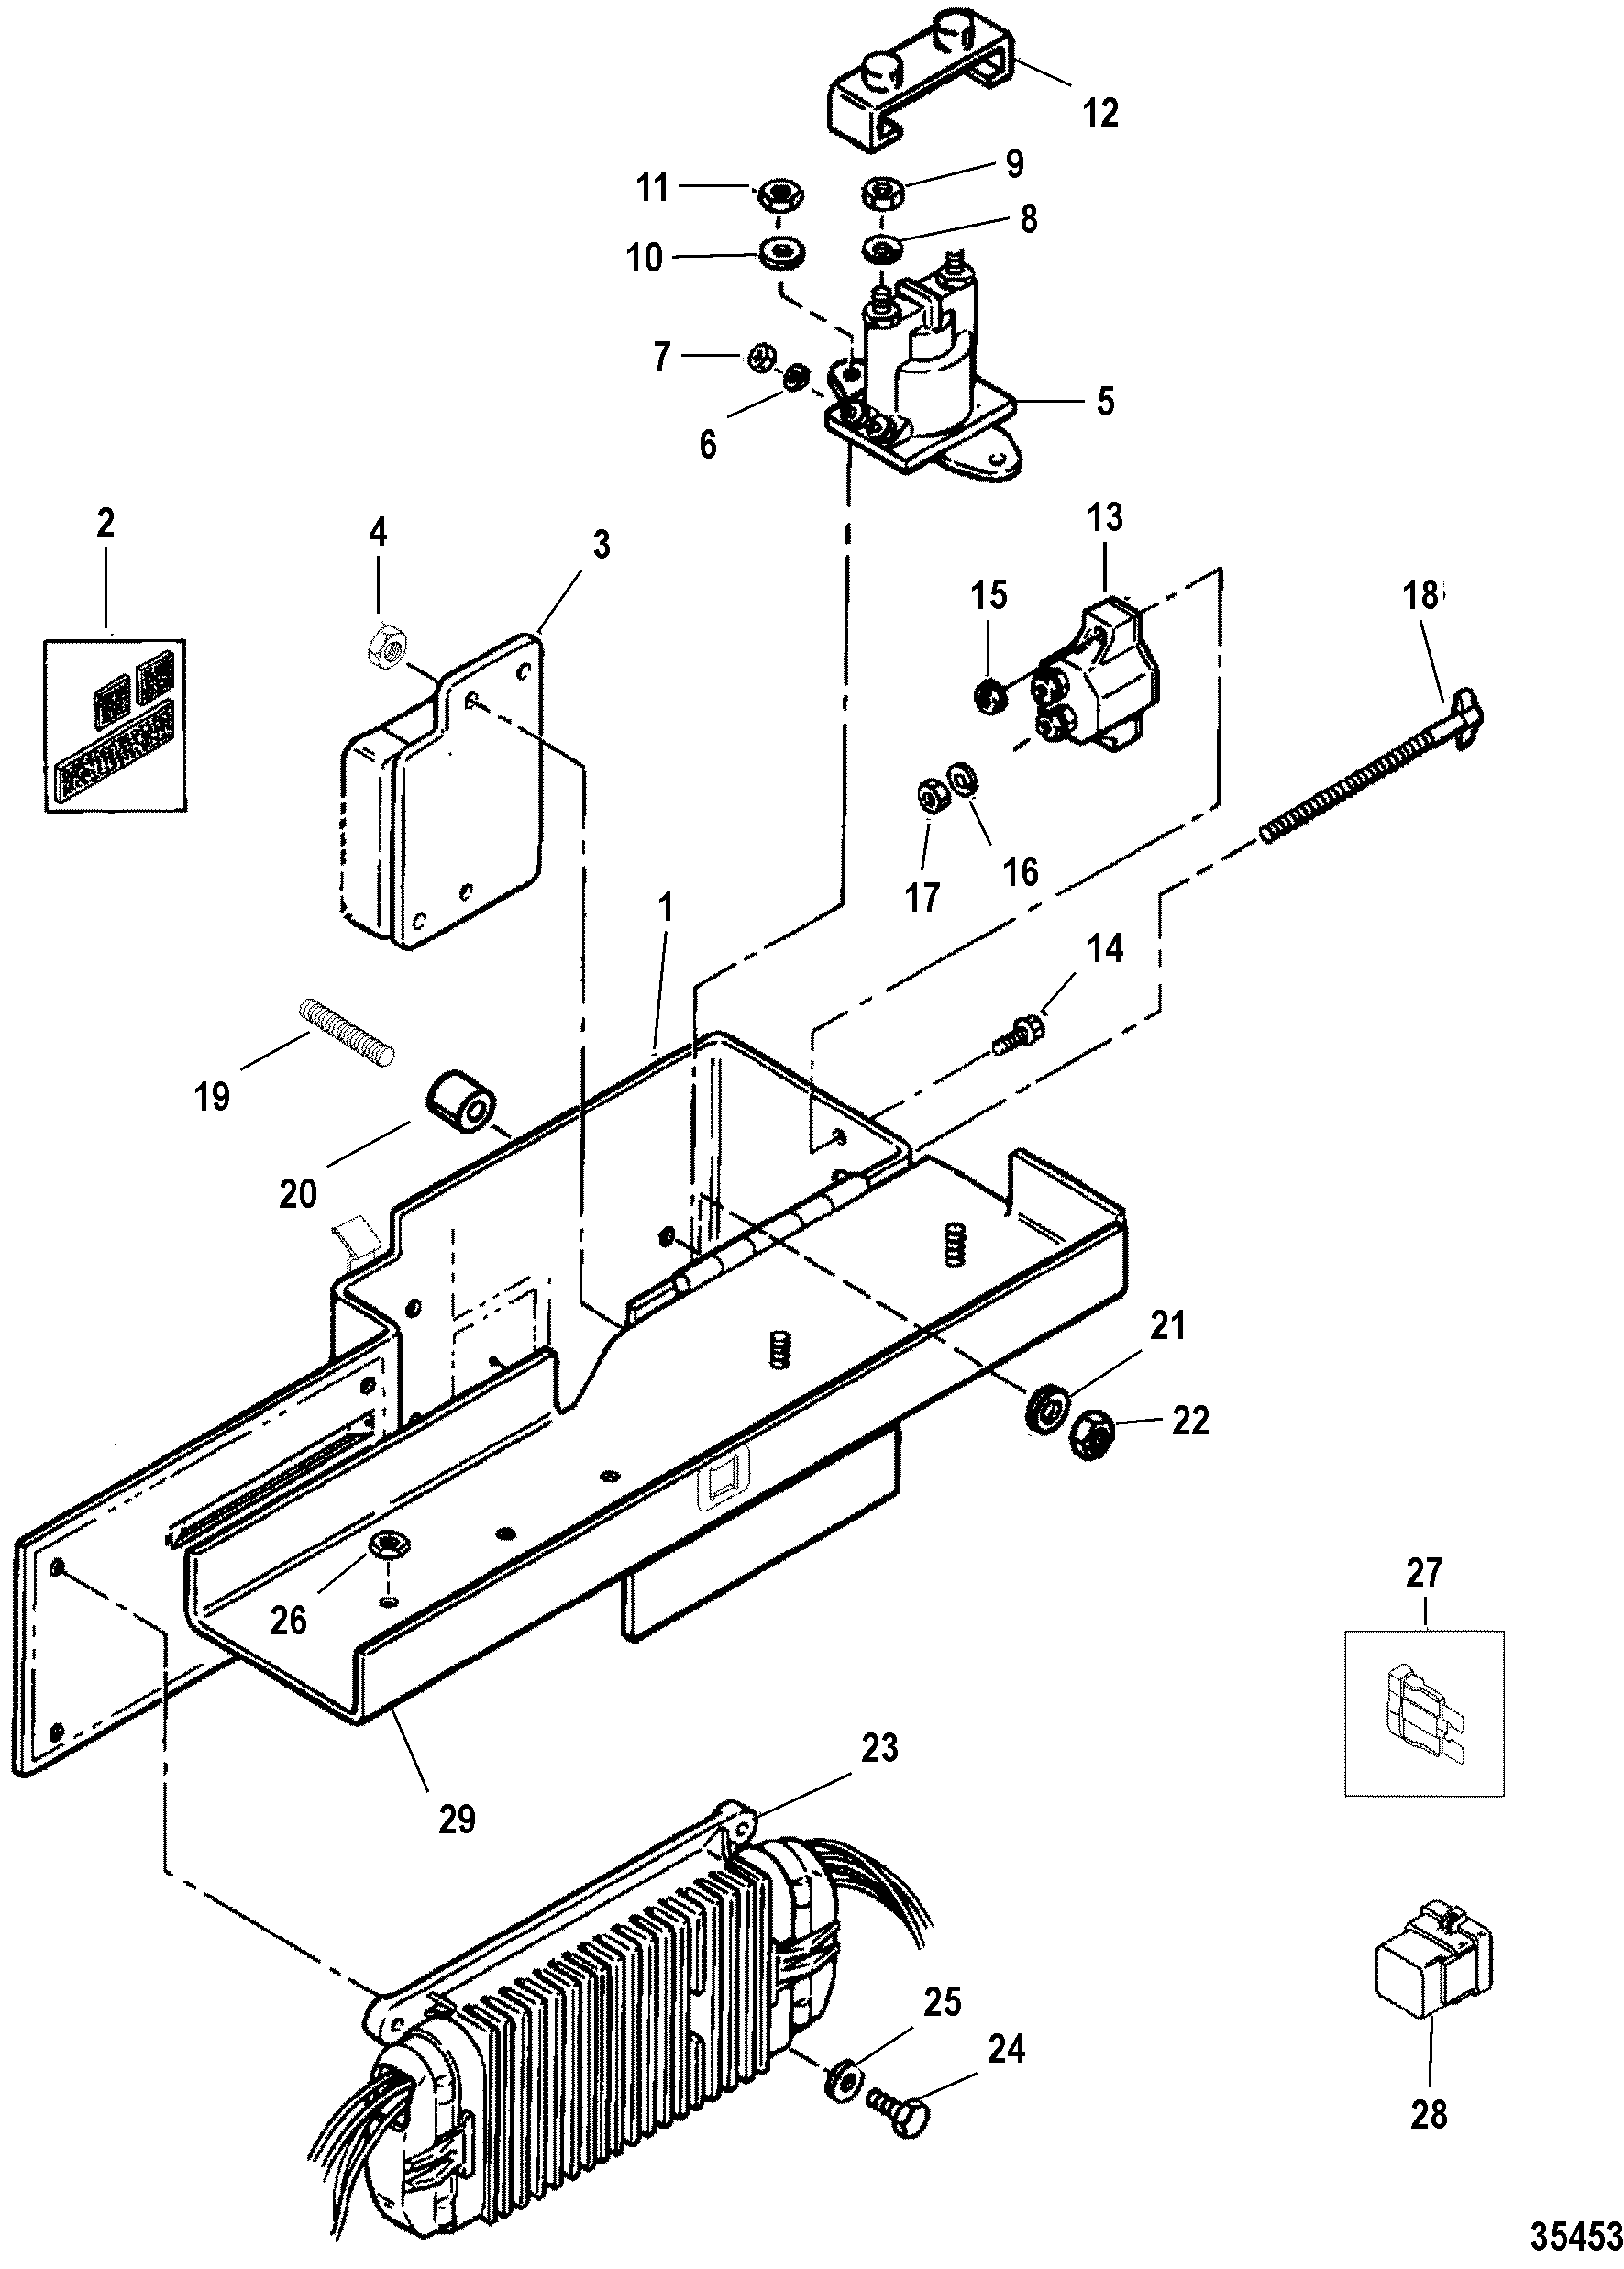 ELECTRICAL BOX AND COMPONENTS